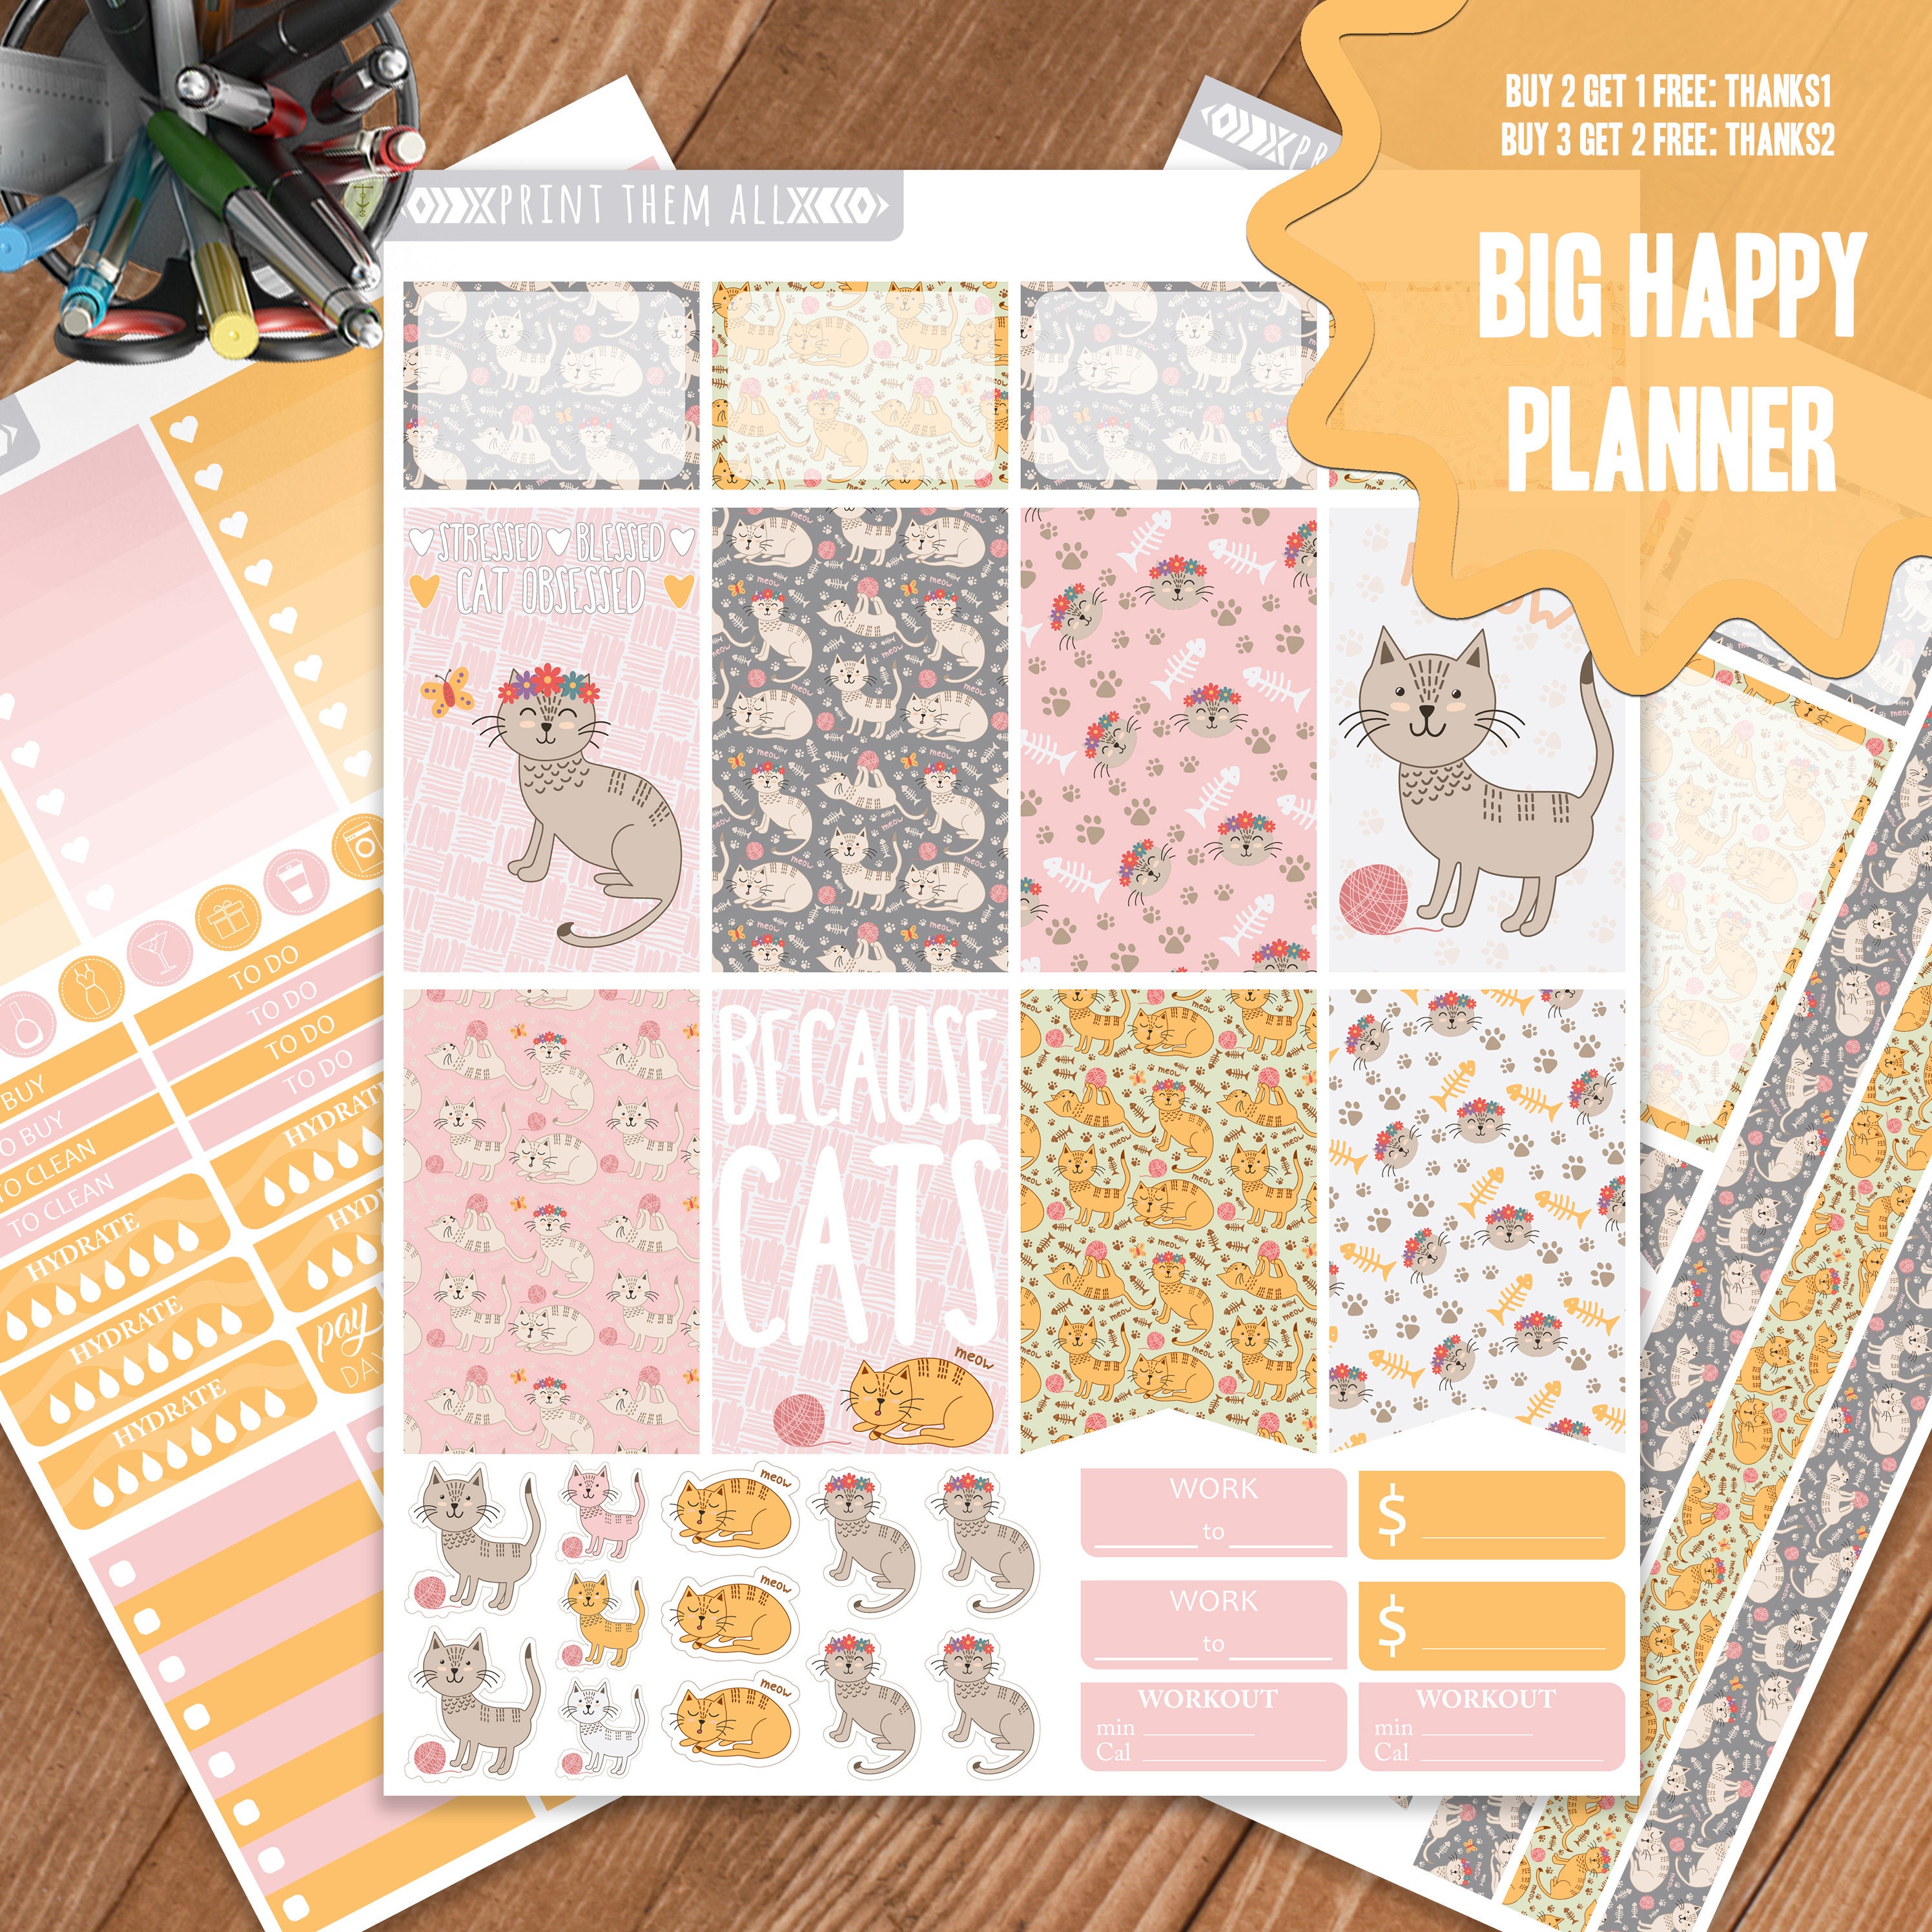 Big Happy Planner, RETRO HOUSEWIVES, Weekly Planner Sticker Kit,  Journaling, Decorative Planning, Scrapbooking, Vintage Women, Snarky, Funny  